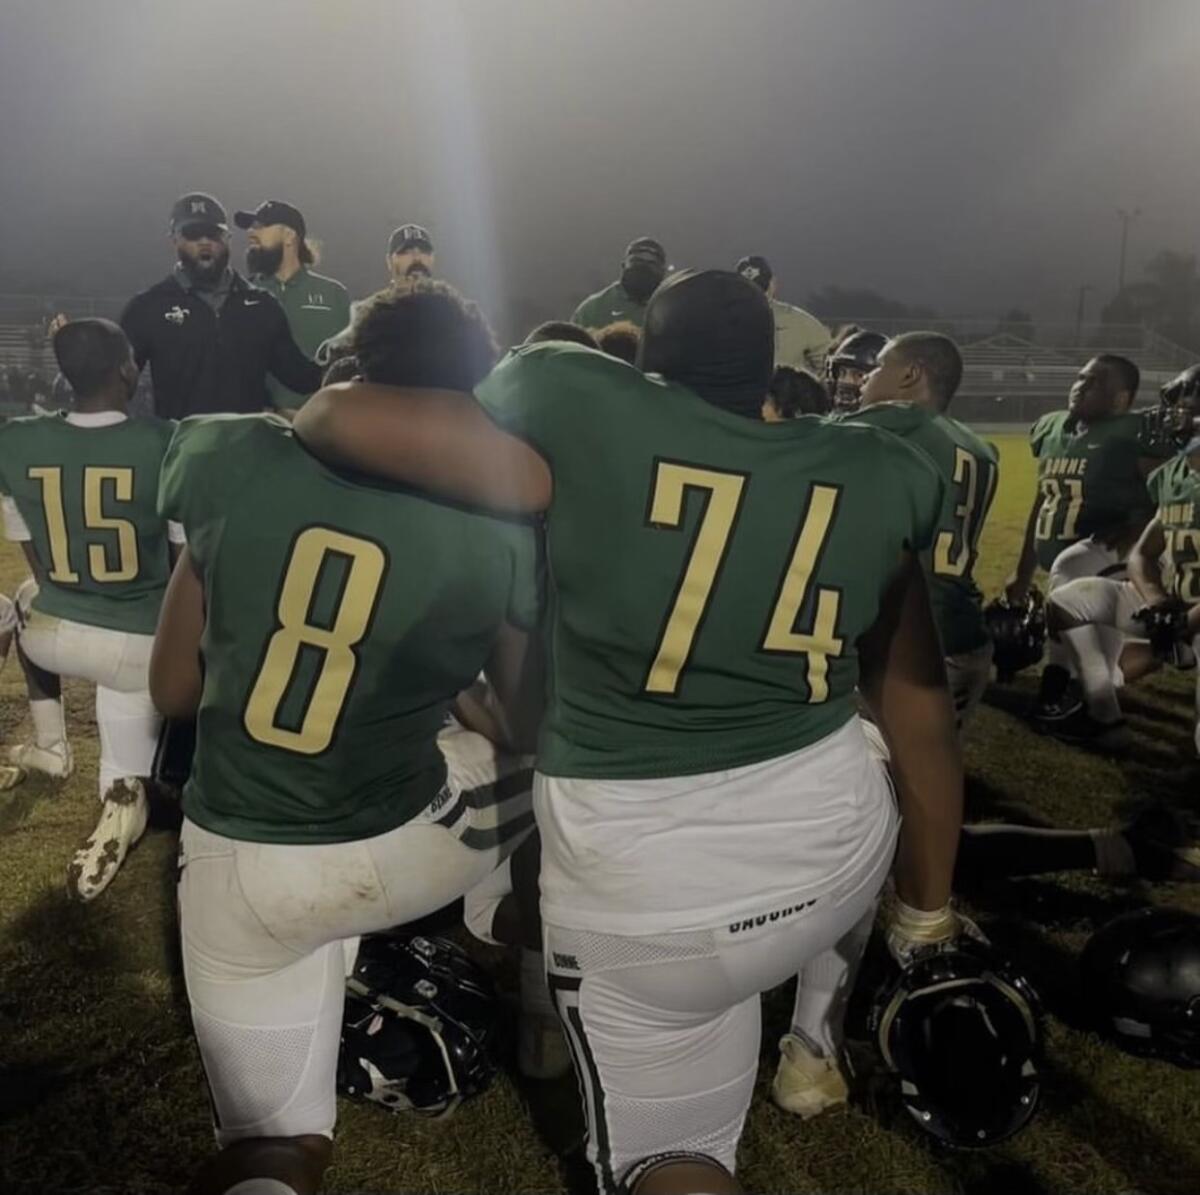 Narbonne players take a knee with their backs to the camera.